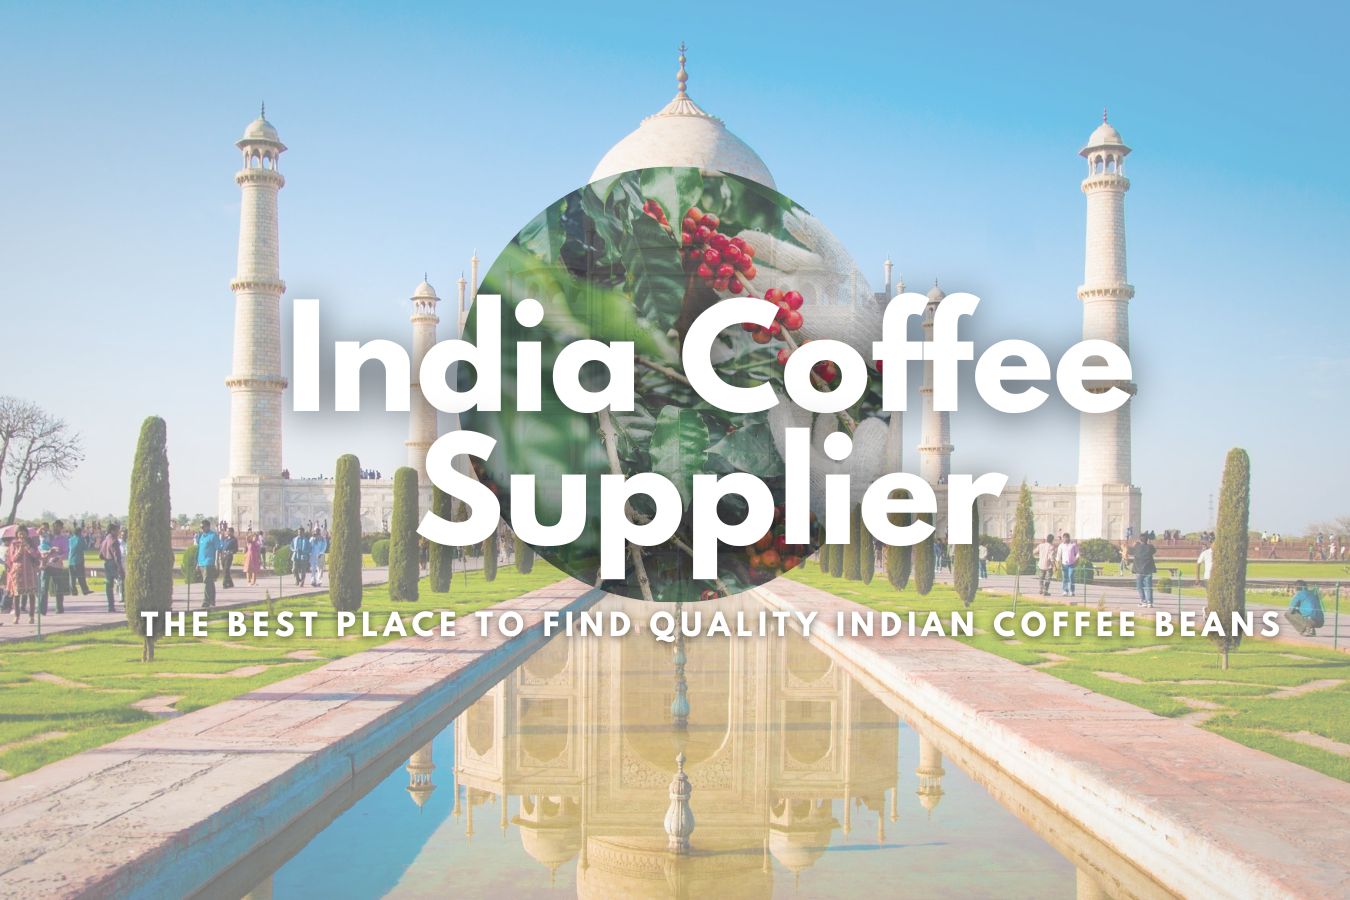 India Coffee Supplier The Best Place to Find Quality Indian Coffee Beans